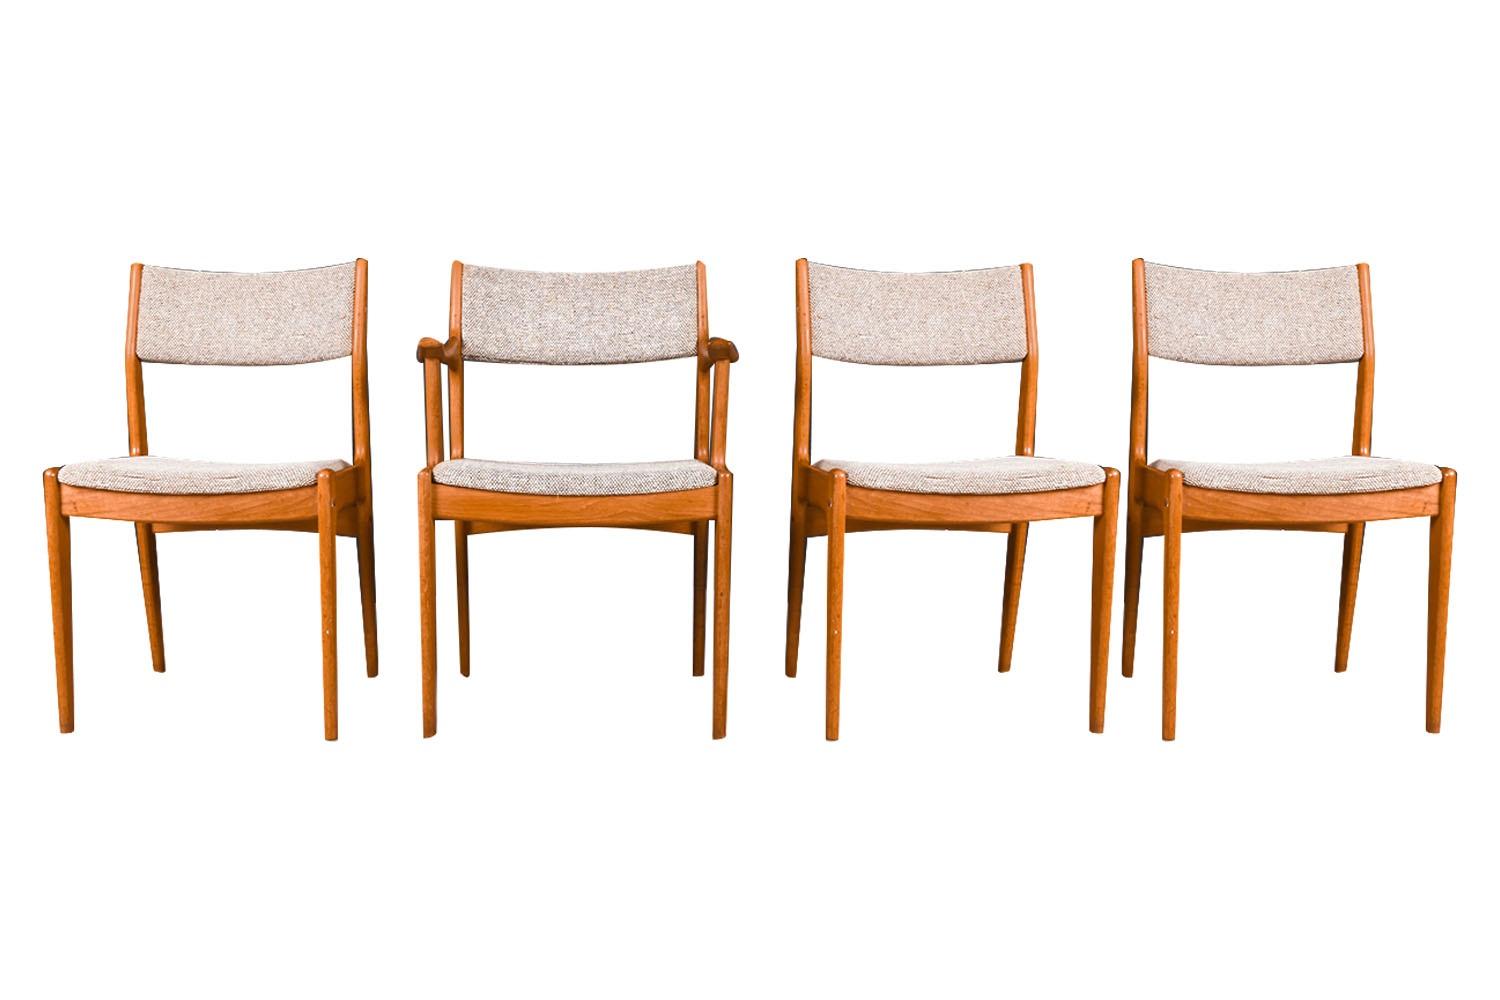 A set of four, extremely sought after, gorgeous 1960s, modern teak side/dining chairs by the Scandinavia Woodworks Co., made in Singapore. Featuring a full matching set of four, one of which has arms, each remains in original condition throughout.